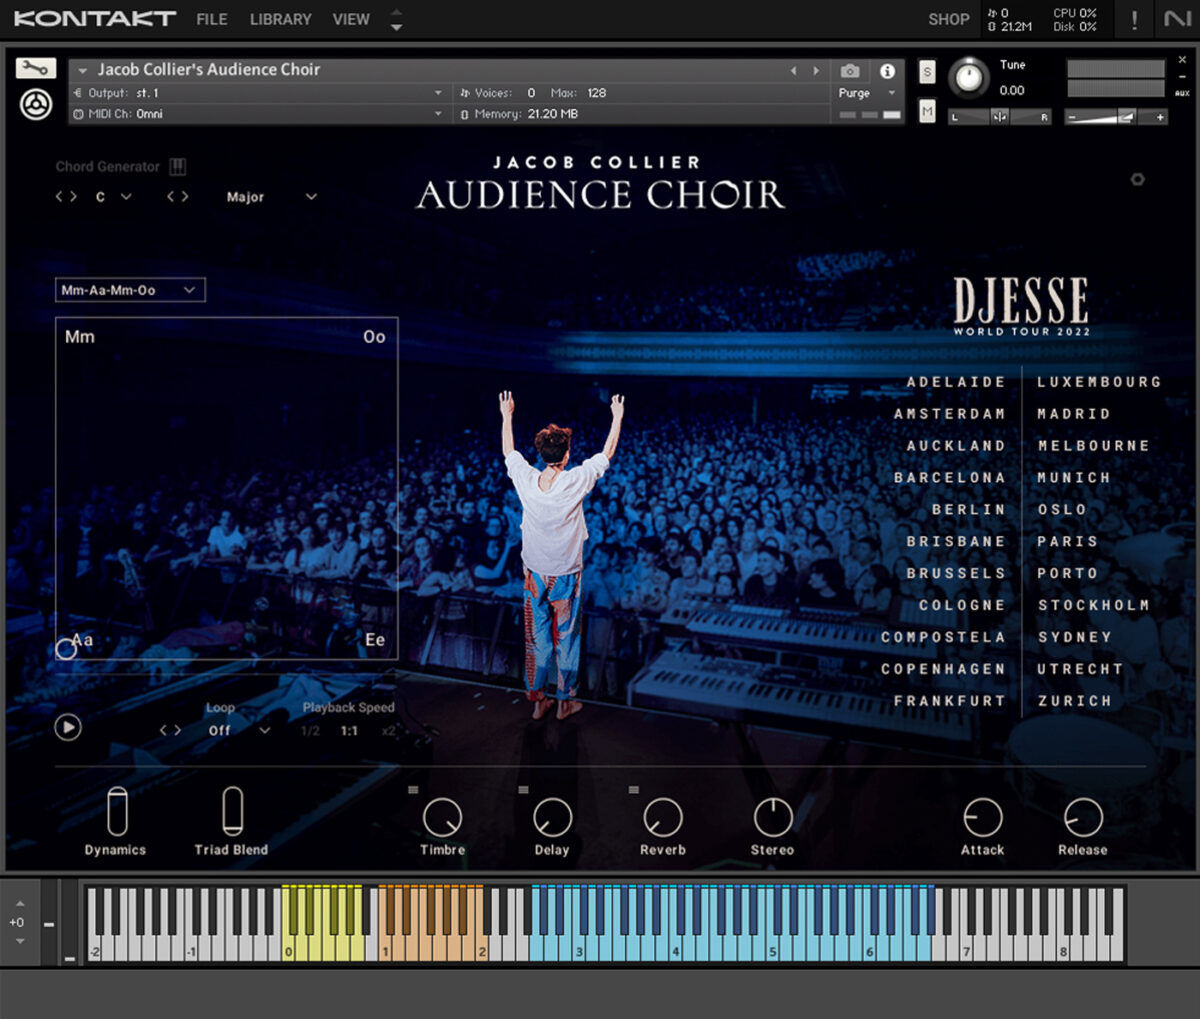 The Audience Choir interface in the Kontakt 7 plugin